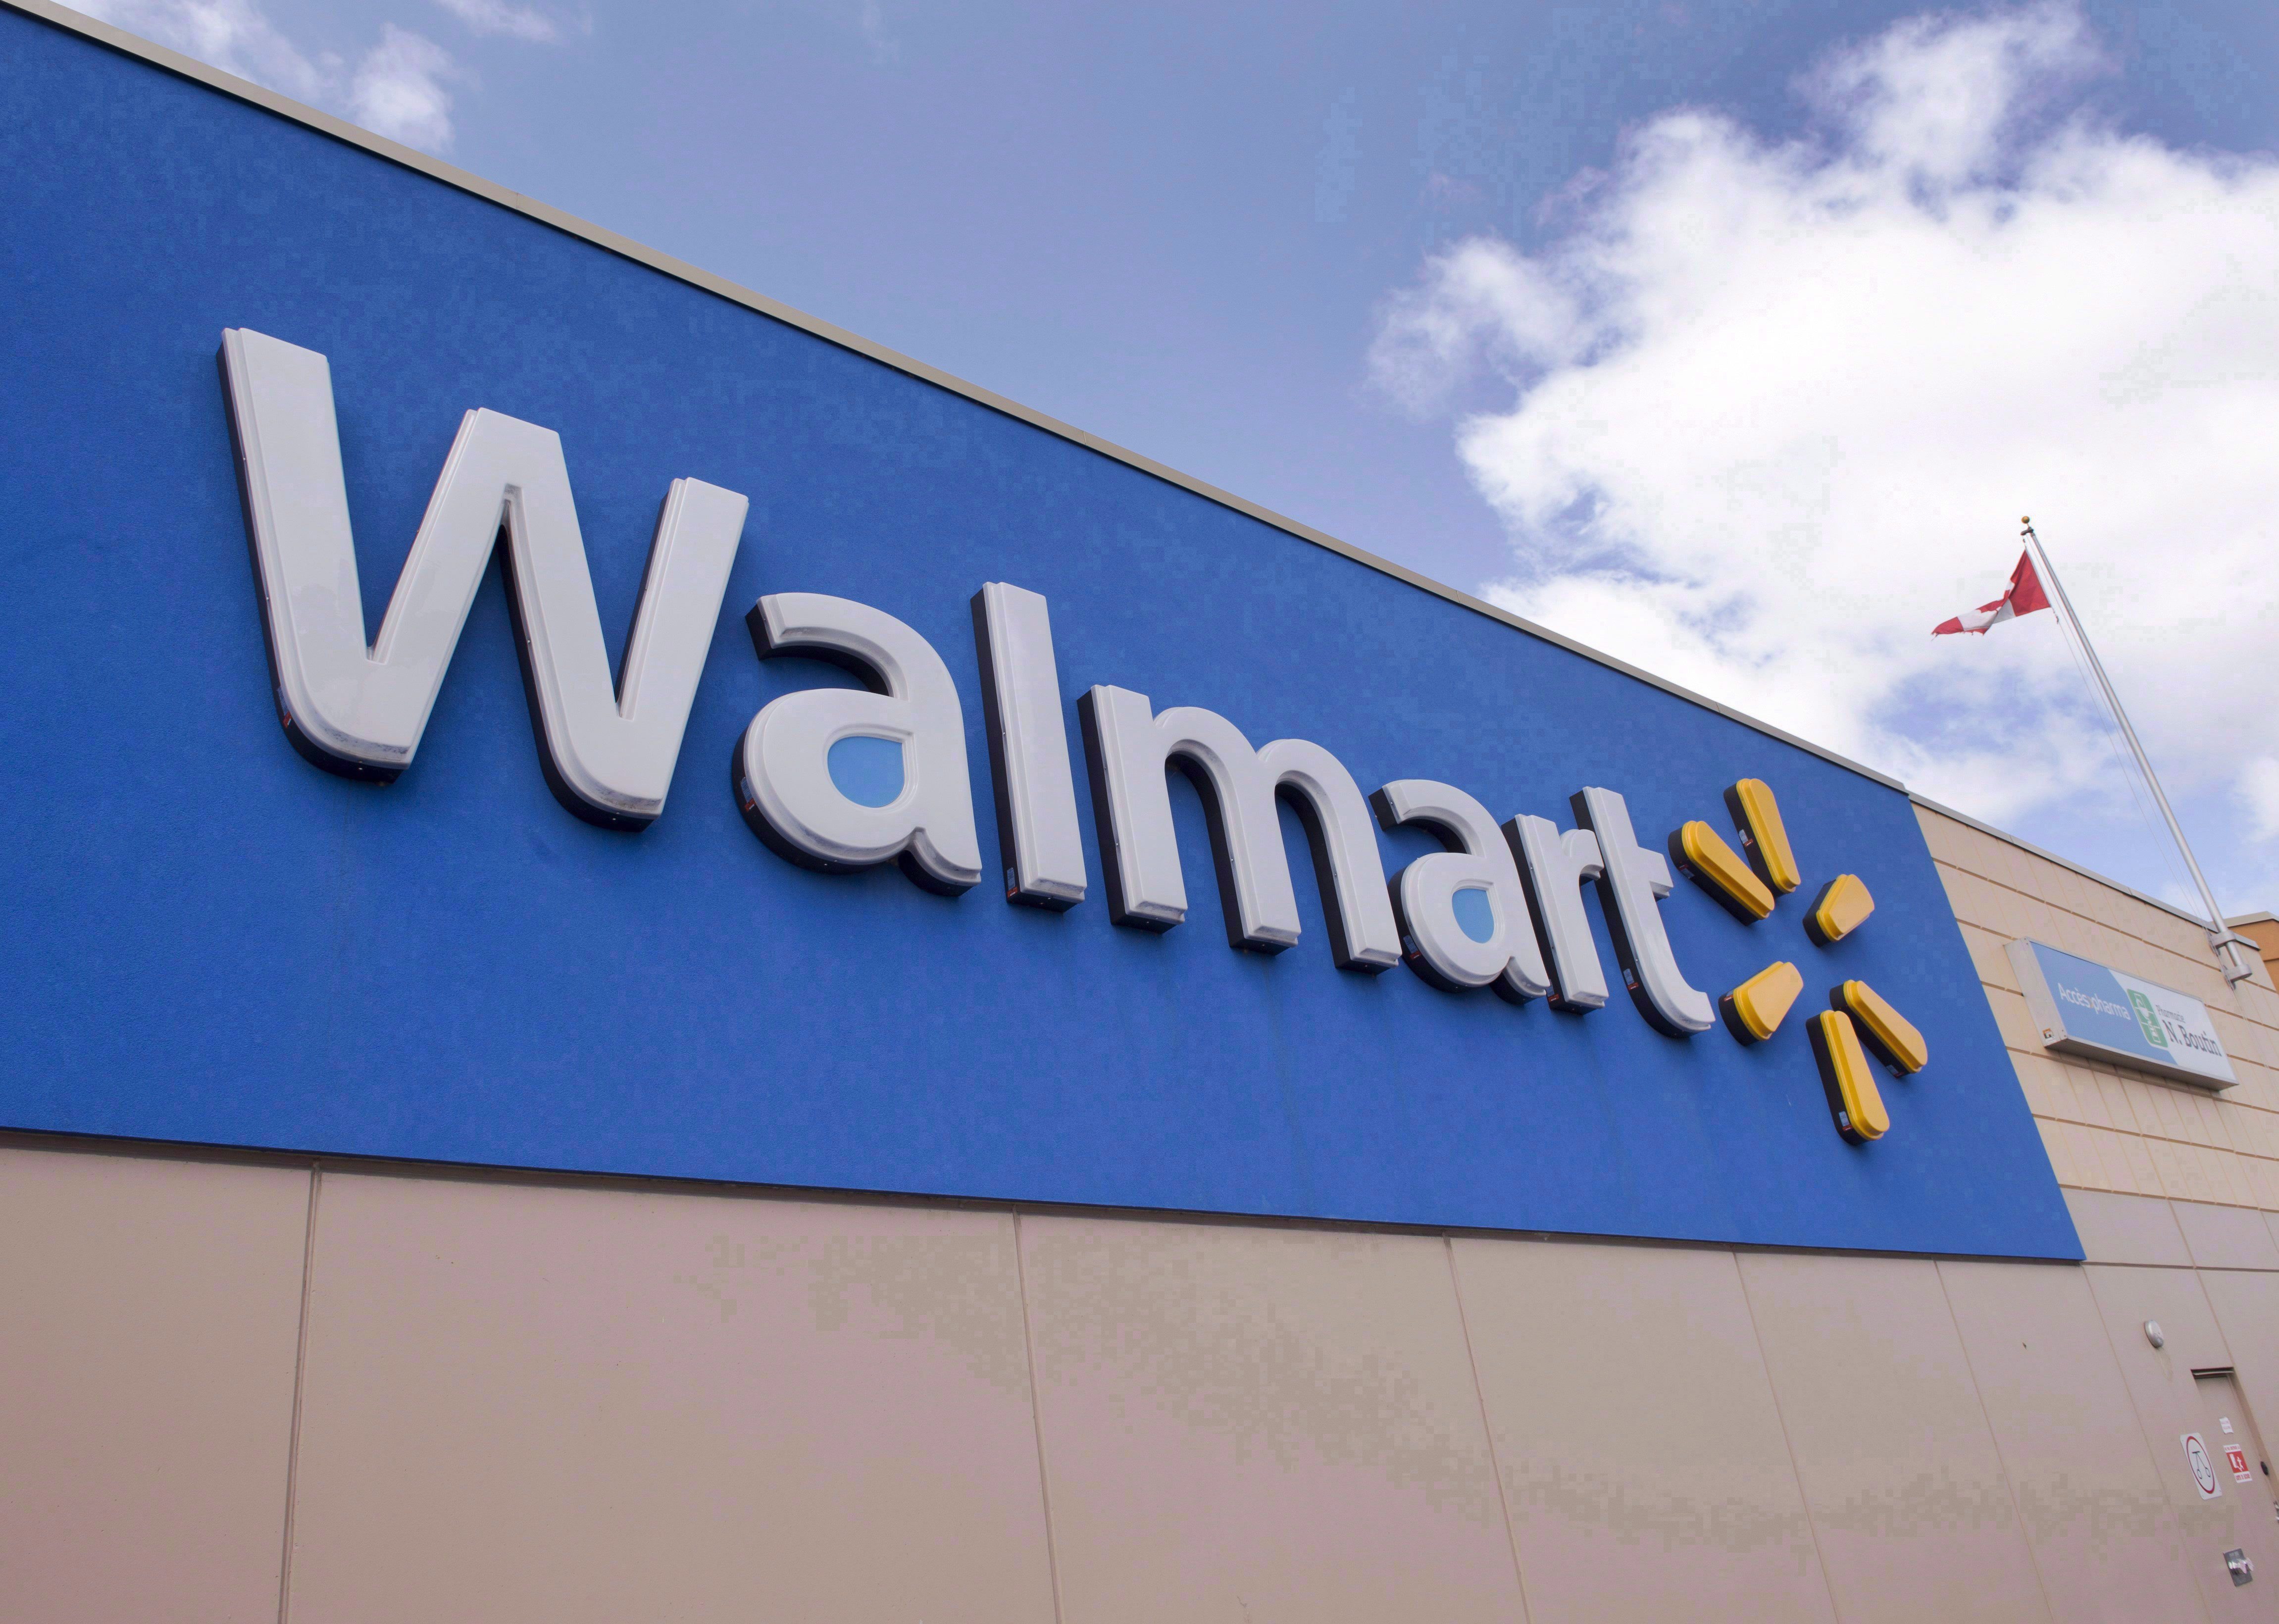 Walmart sorry for "confusion" over end of program for people with disabilities